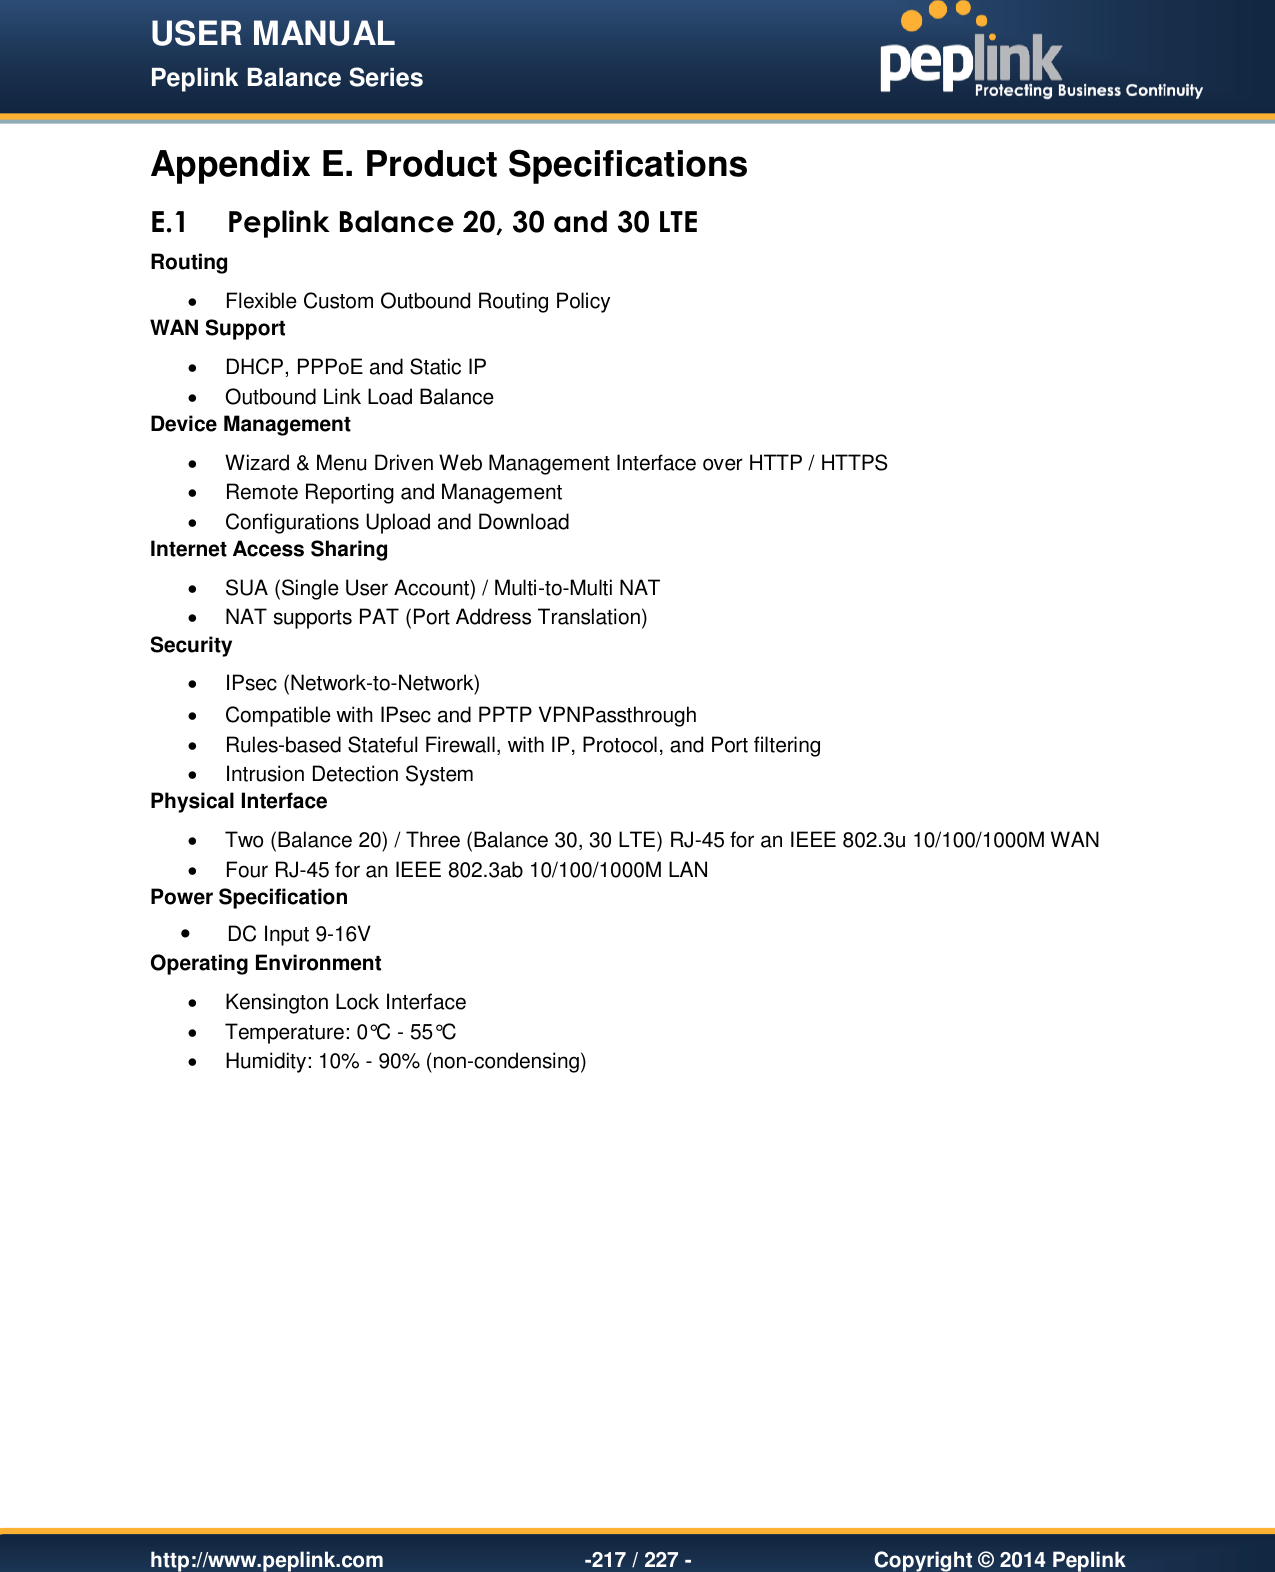 USER MANUAL Peplink Balance Series   http://www.peplink.com -217 / 227 -  Copyright © 2014 Peplink Appendix E. Product Specifications E.1 Peplink Balance 20, 30 and 30 LTE Routing   Flexible Custom Outbound Routing Policy WAN Support   DHCP, PPPoE and Static IP   Outbound Link Load Balance Device Management   Wizard &amp; Menu Driven Web Management Interface over HTTP / HTTPS    Remote Reporting and Management   Configurations Upload and Download Internet Access Sharing   SUA (Single User Account) / Multi-to-Multi NAT    NAT supports PAT (Port Address Translation) Security   IPsec (Network-to-Network)   Compatible with IPsec and PPTP VPNPassthrough   Rules-based Stateful Firewall, with IP, Protocol, and Port filtering   Intrusion Detection System Physical Interface   Two (Balance 20) / Three (Balance 30, 30 LTE) RJ-45 for an IEEE 802.3u 10/100/1000M WAN    Four RJ-45 for an IEEE 802.3ab 10/100/1000M LAN  Power Specification  DC Input 9-16V Operating Environment   Kensington Lock Interface    Temperature: 0°C - 55°C    Humidity: 10% - 90% (non-condensing) 